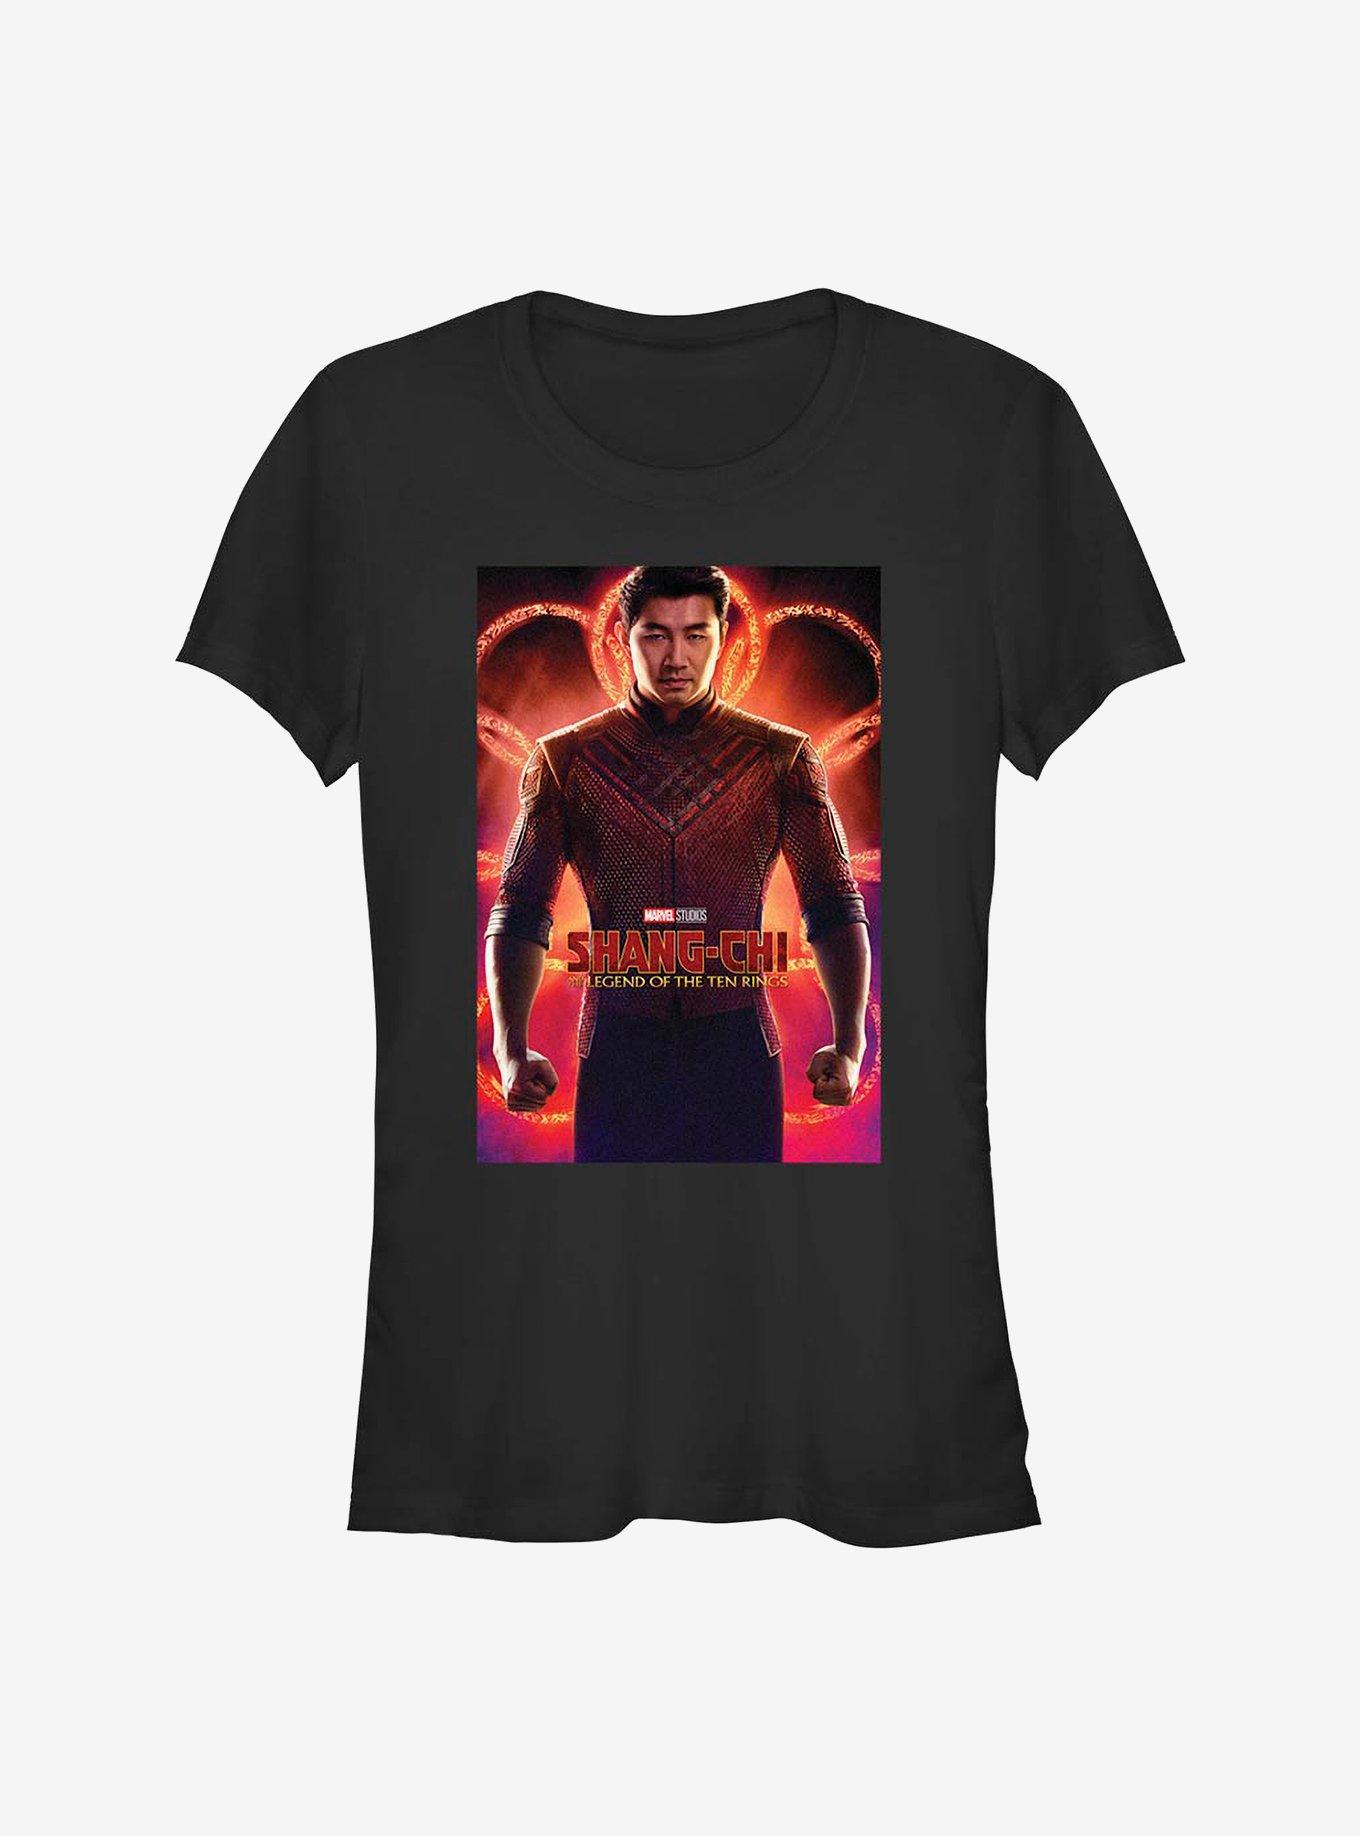 Marvel Shang-Chi And The Legend Of Ten Rings Poster Girls T-Shirt